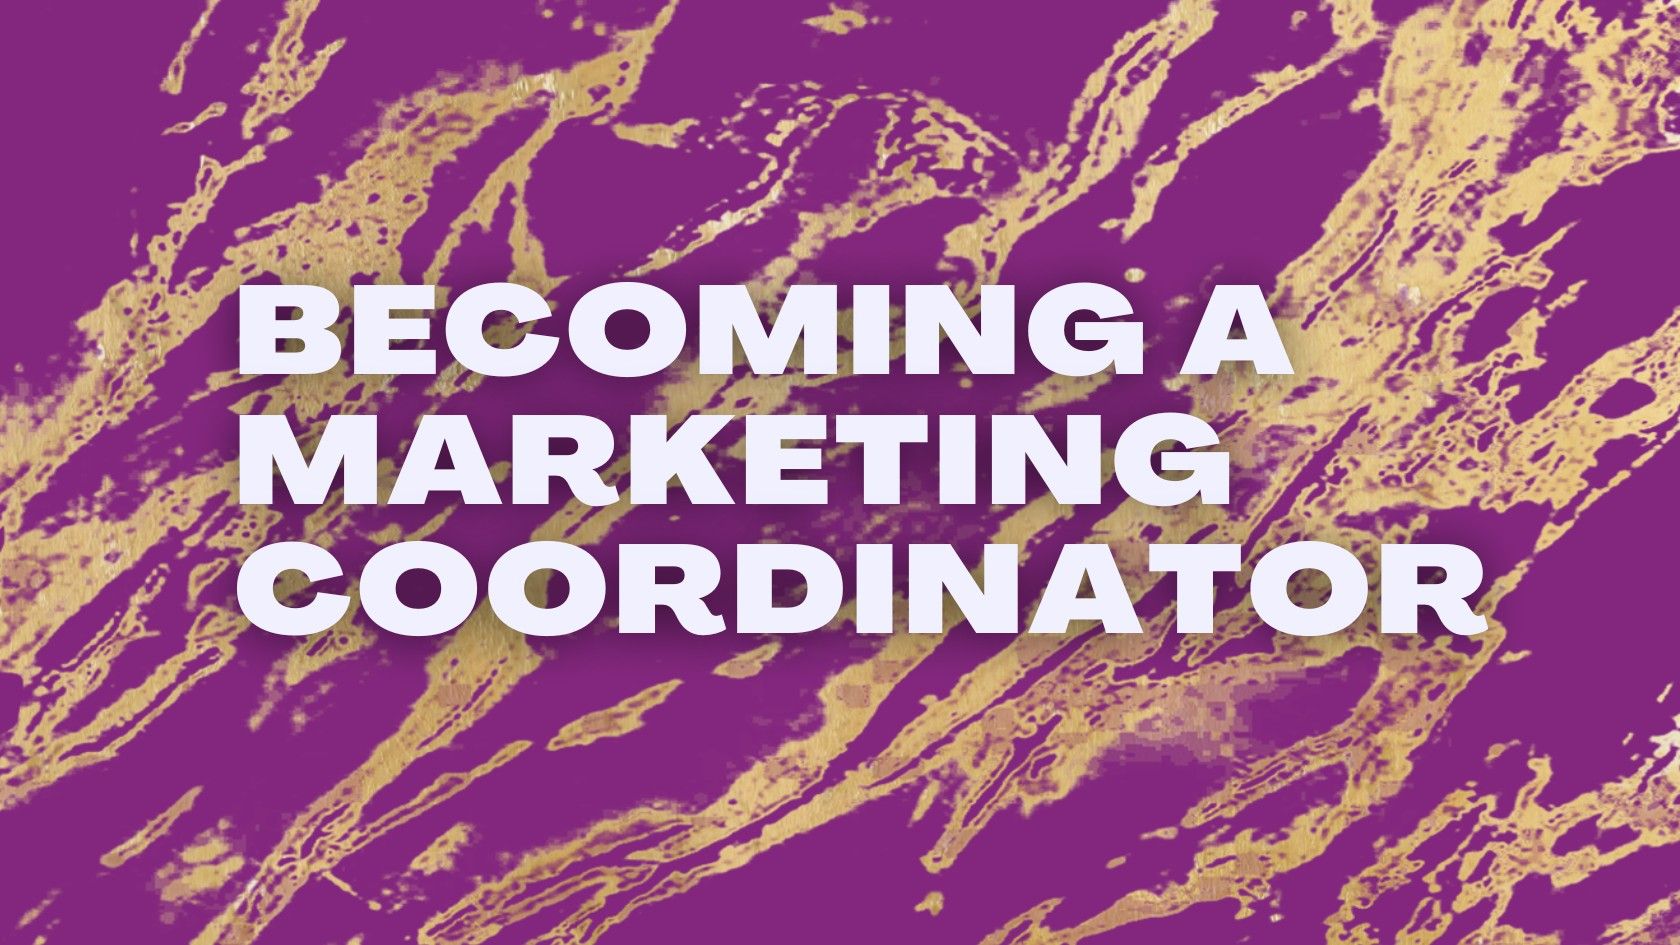 Marketing Coordinator: A Guide on How to Become One, Essential Skills, and Salary